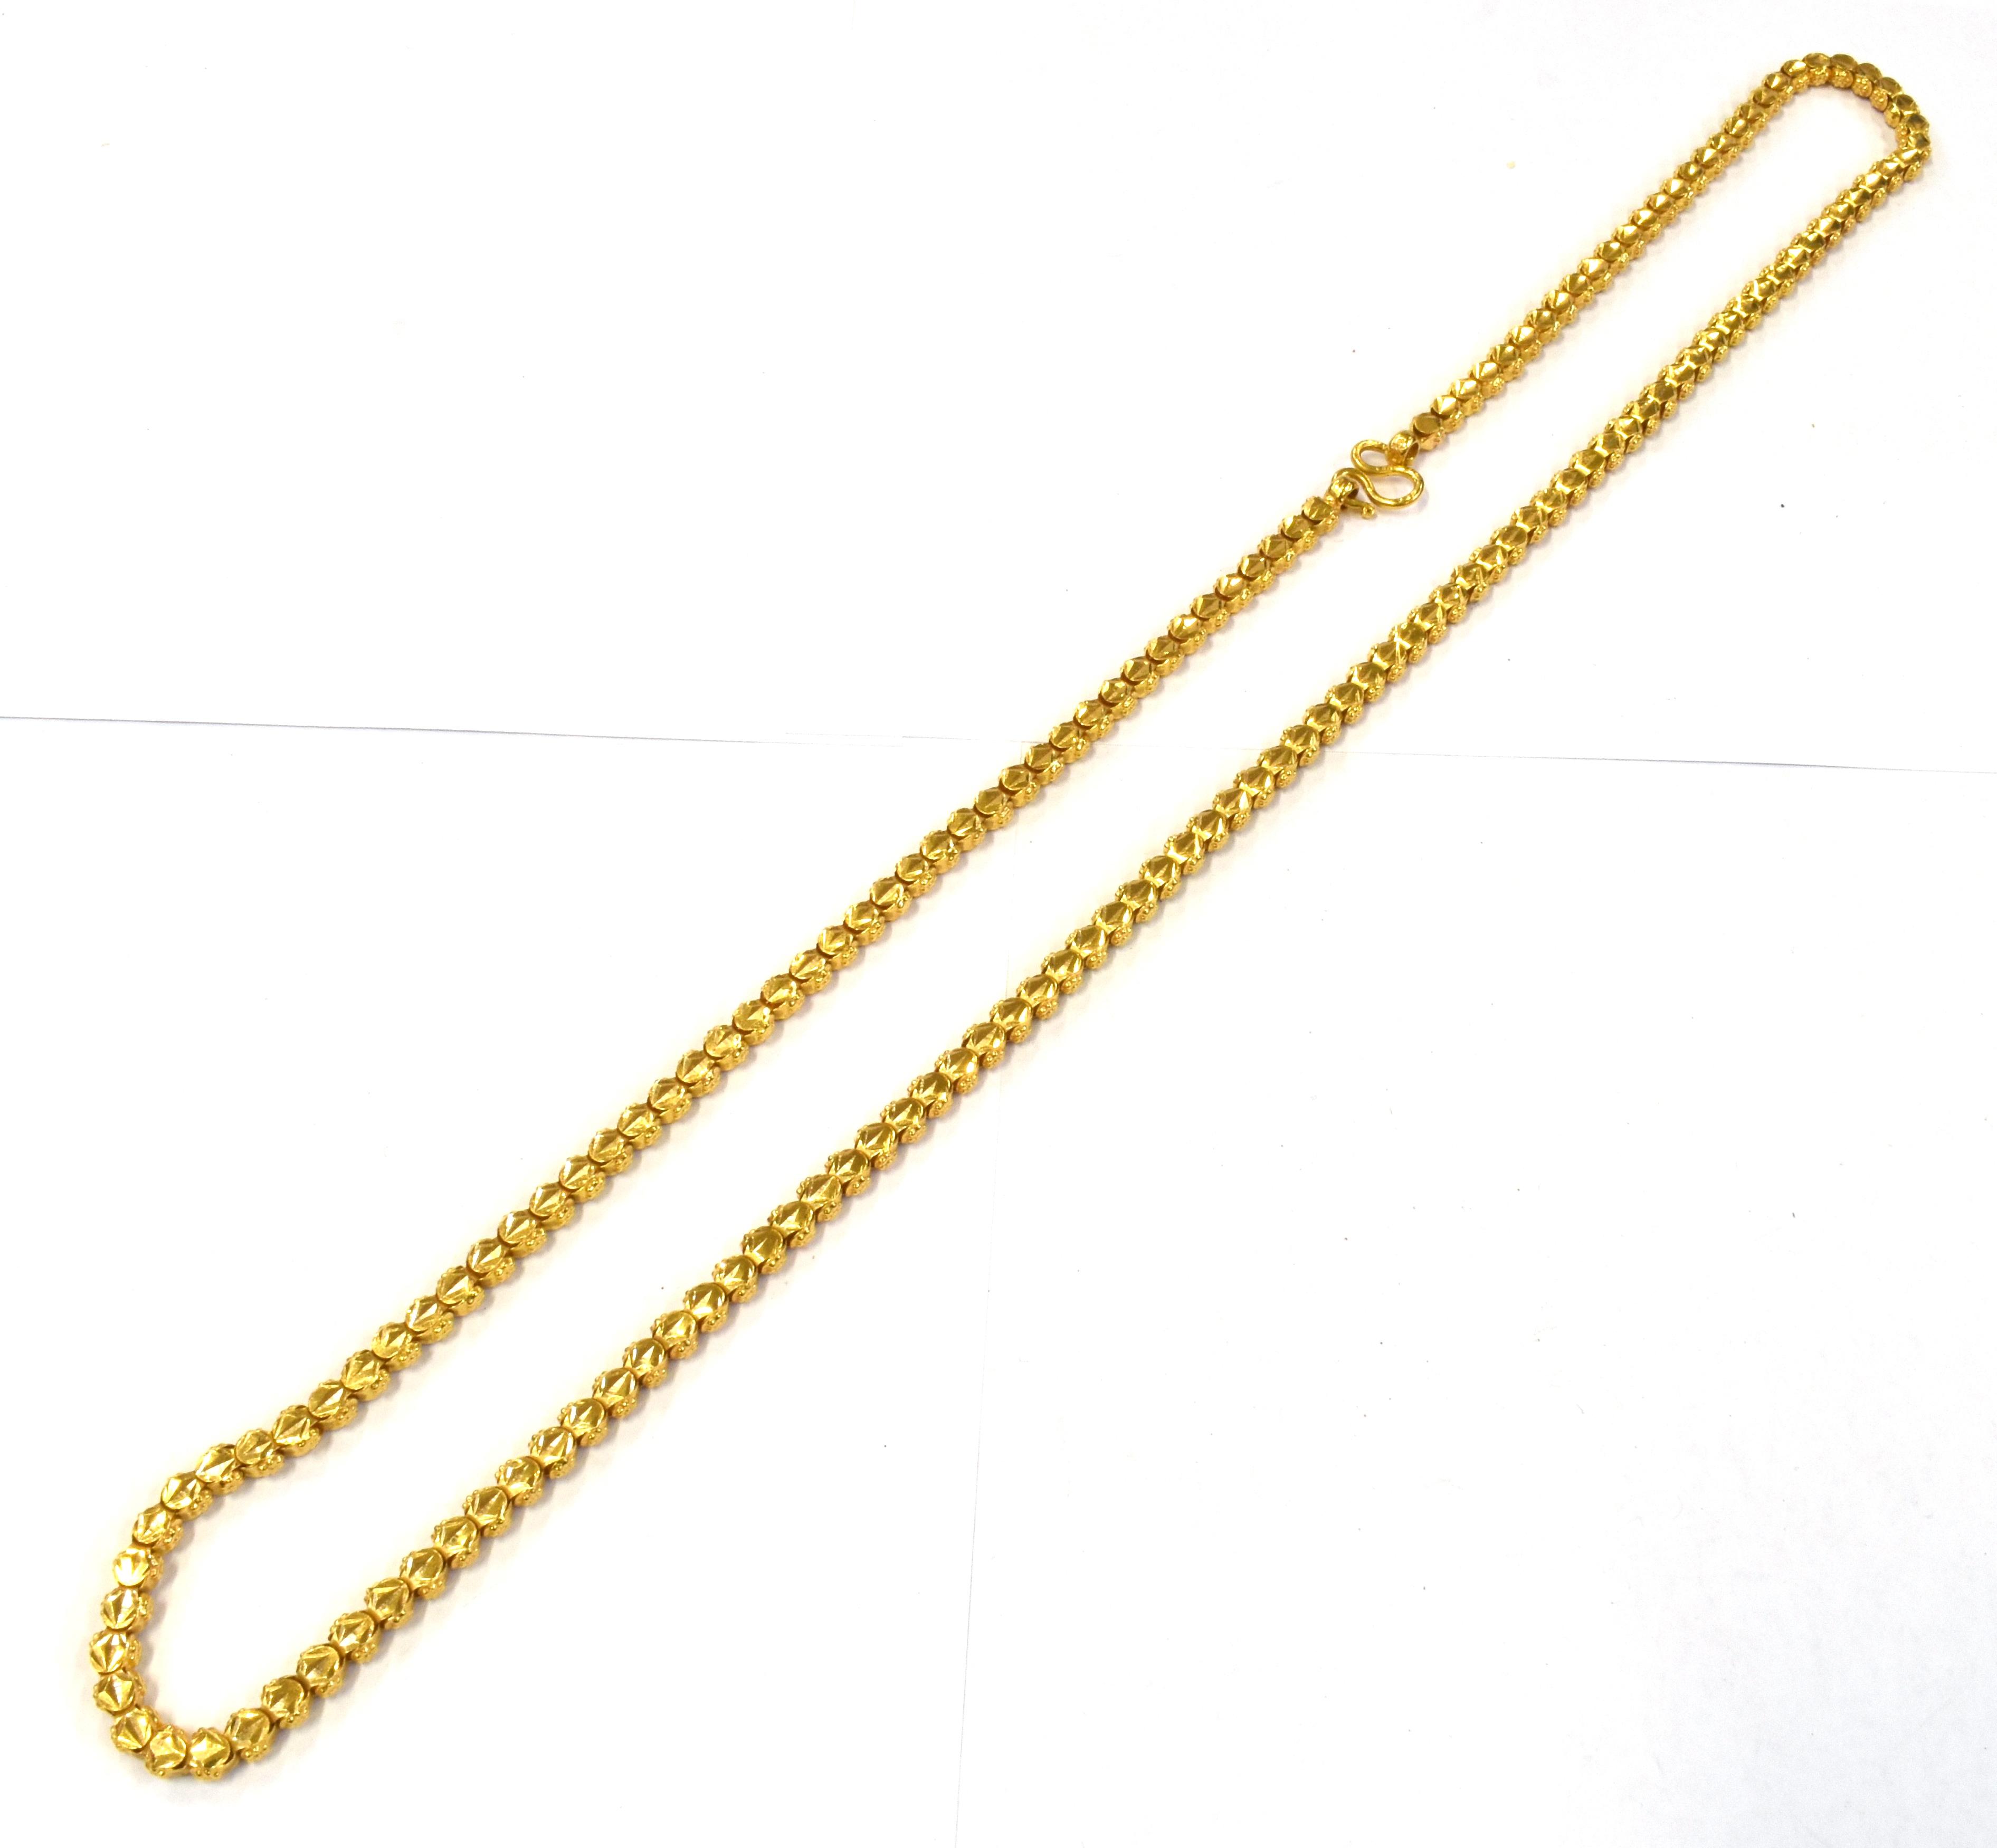 AN ARABIAN GOLD FANCY LINK NECKLACE with shepherd hook clasp, stamped 22KT, complete with box,